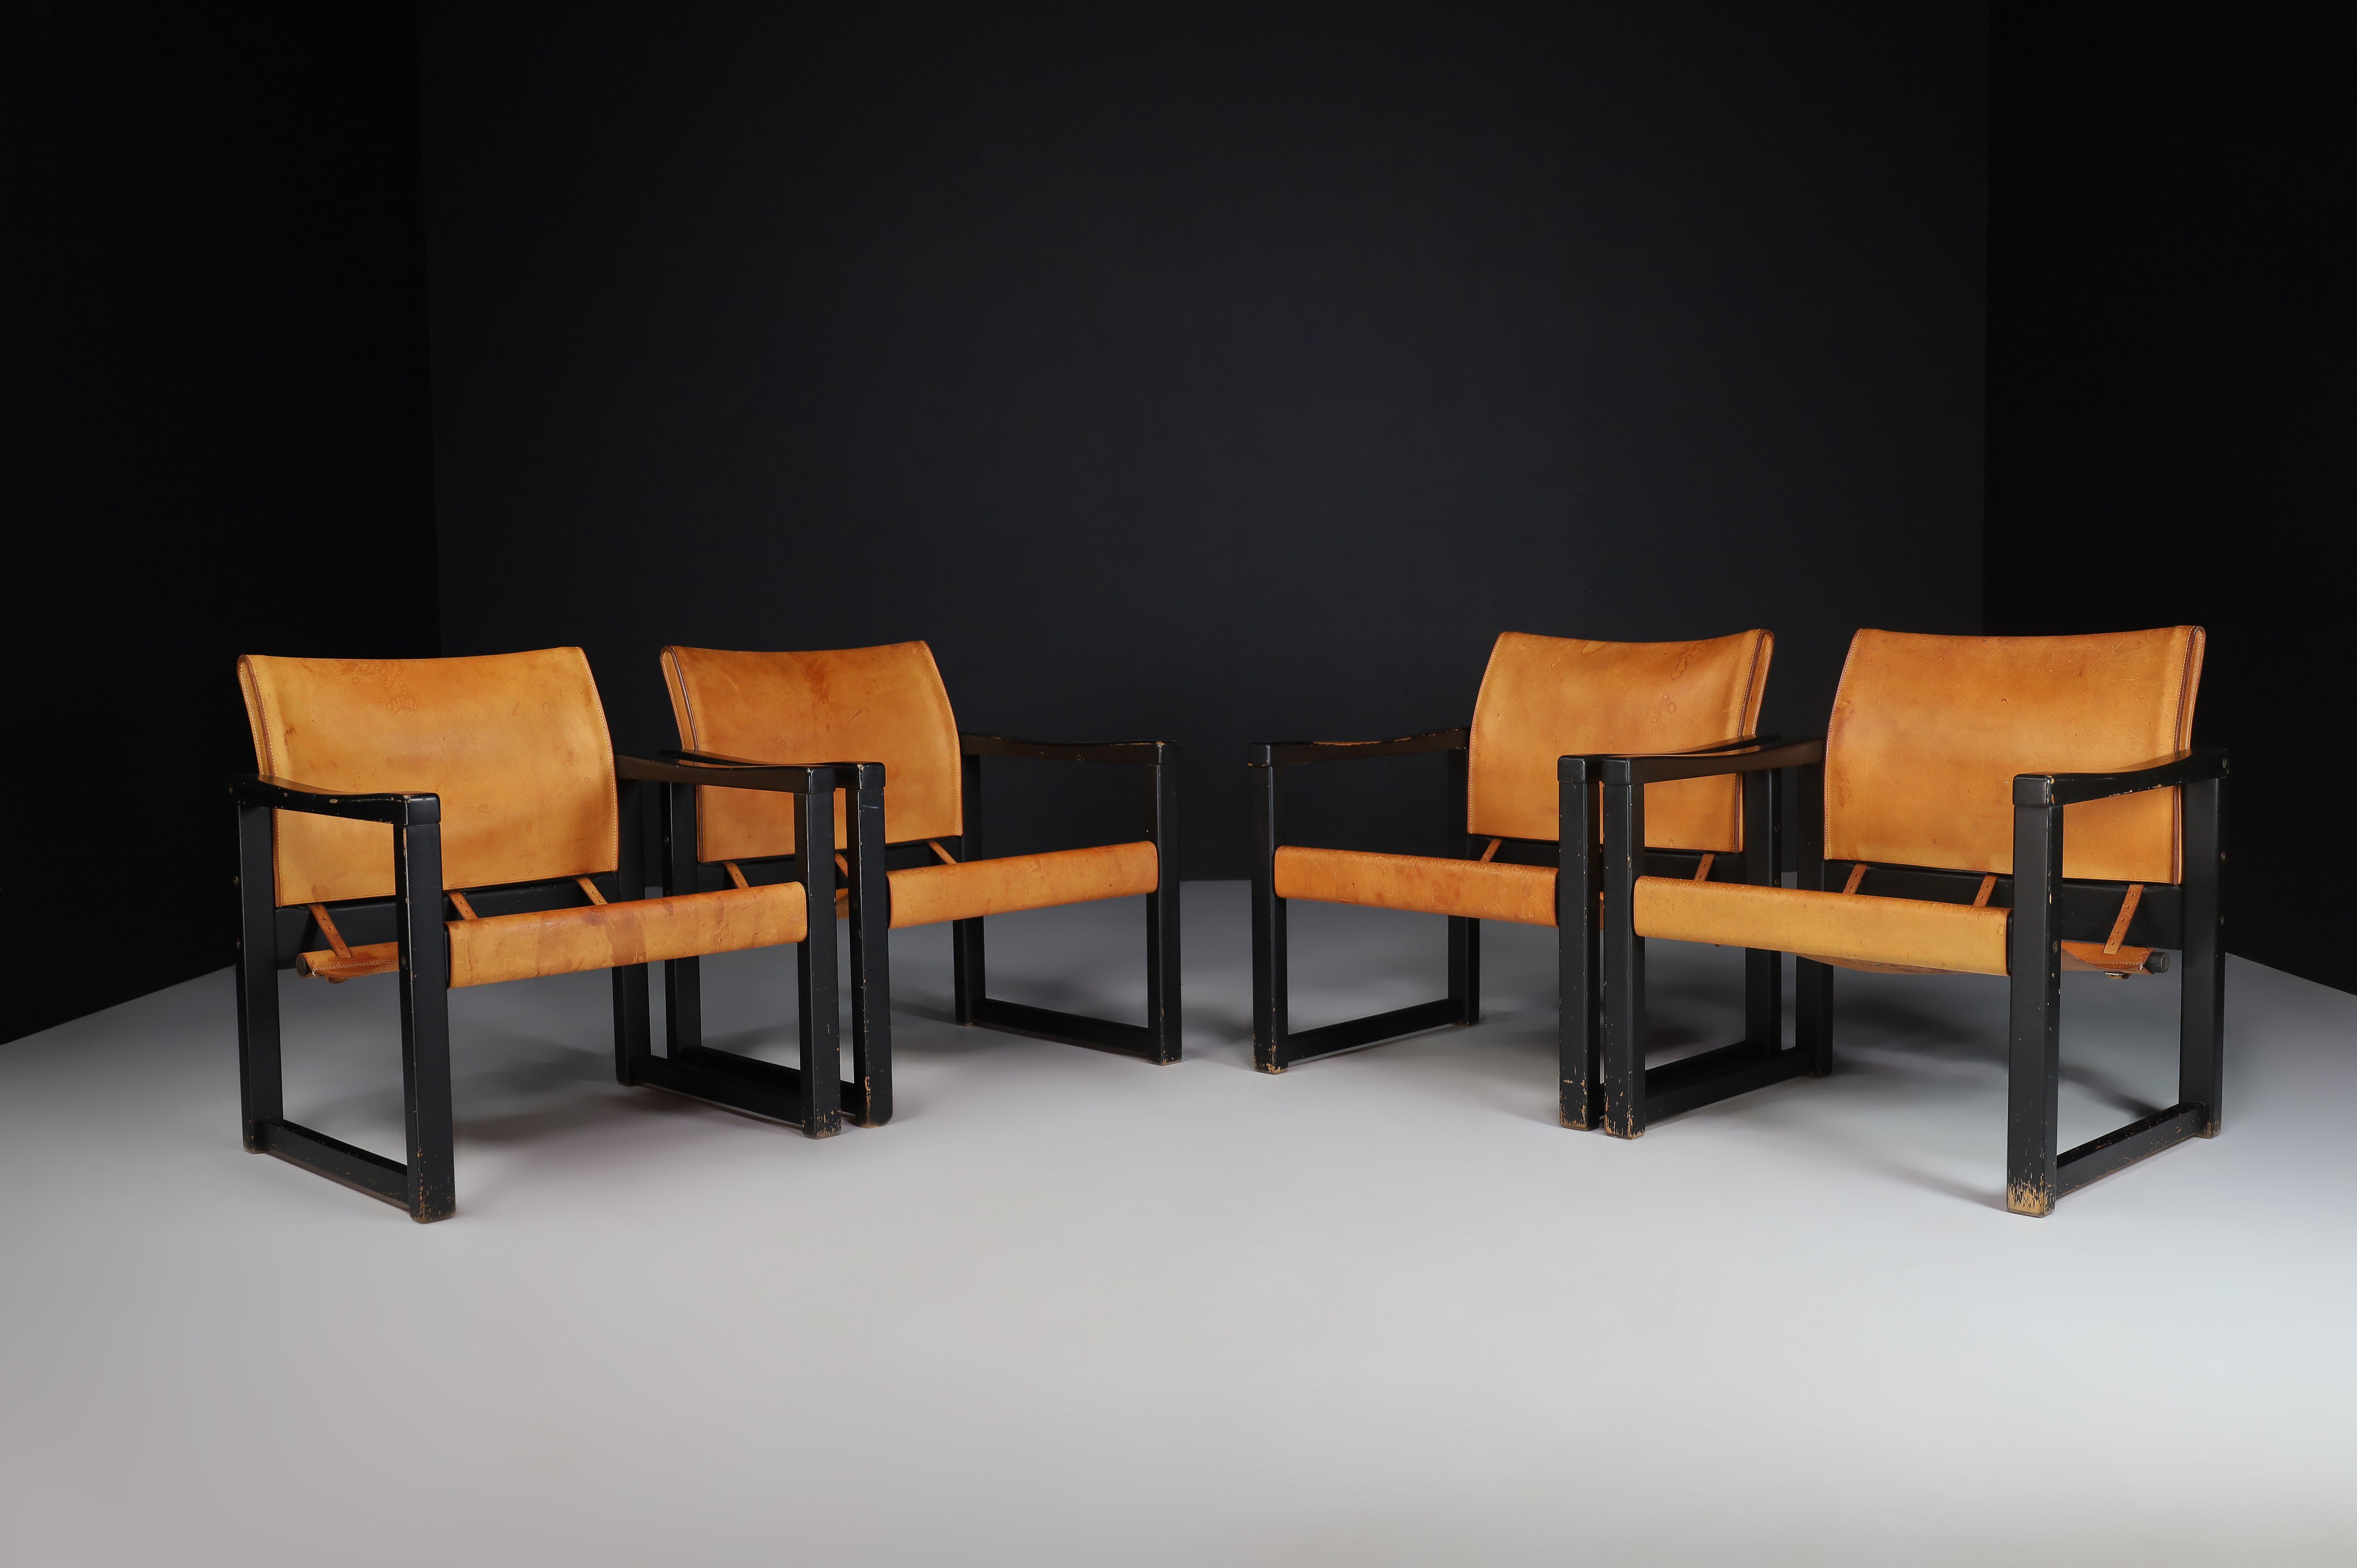 Cognac leather safari lounge chairs Karin Mobring, Sweden 1970s.

Karin Mobring designed this Ikea Classic Vintage Lounge chair in 1972. It is made of solid Scandinavian pine wood. This version is rare, black lacquered by the producer IKEA. The